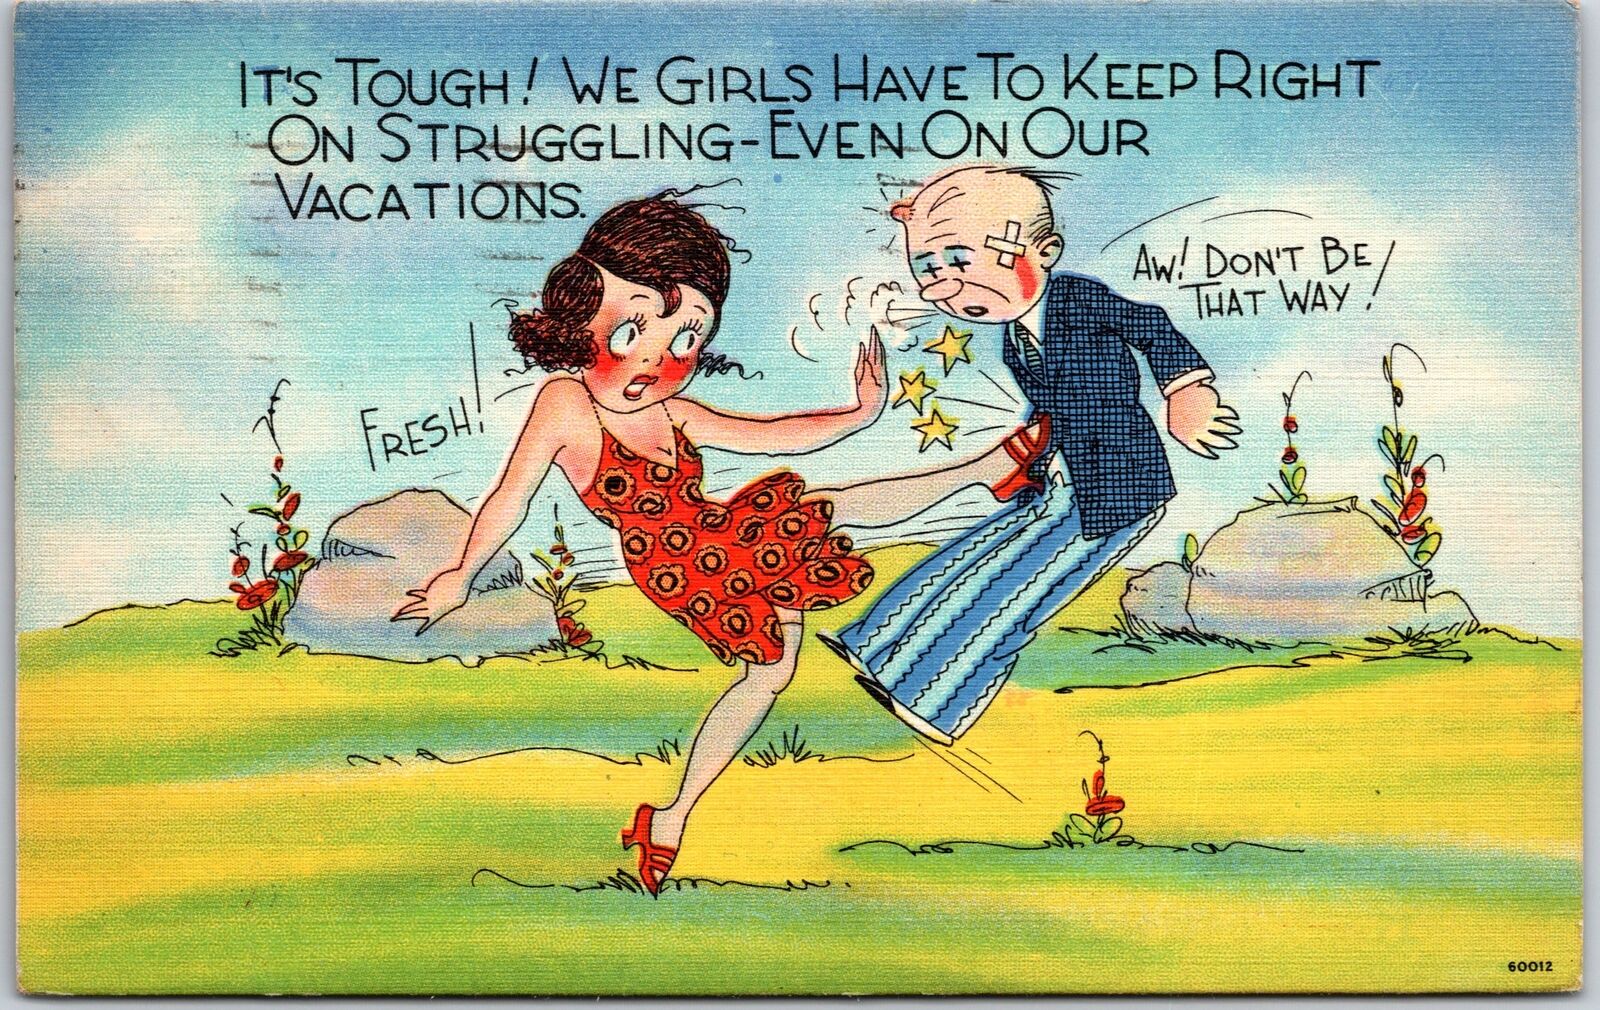 1936 Old Man Kicked By The Lady Vacation Comic Card Posted Postcard